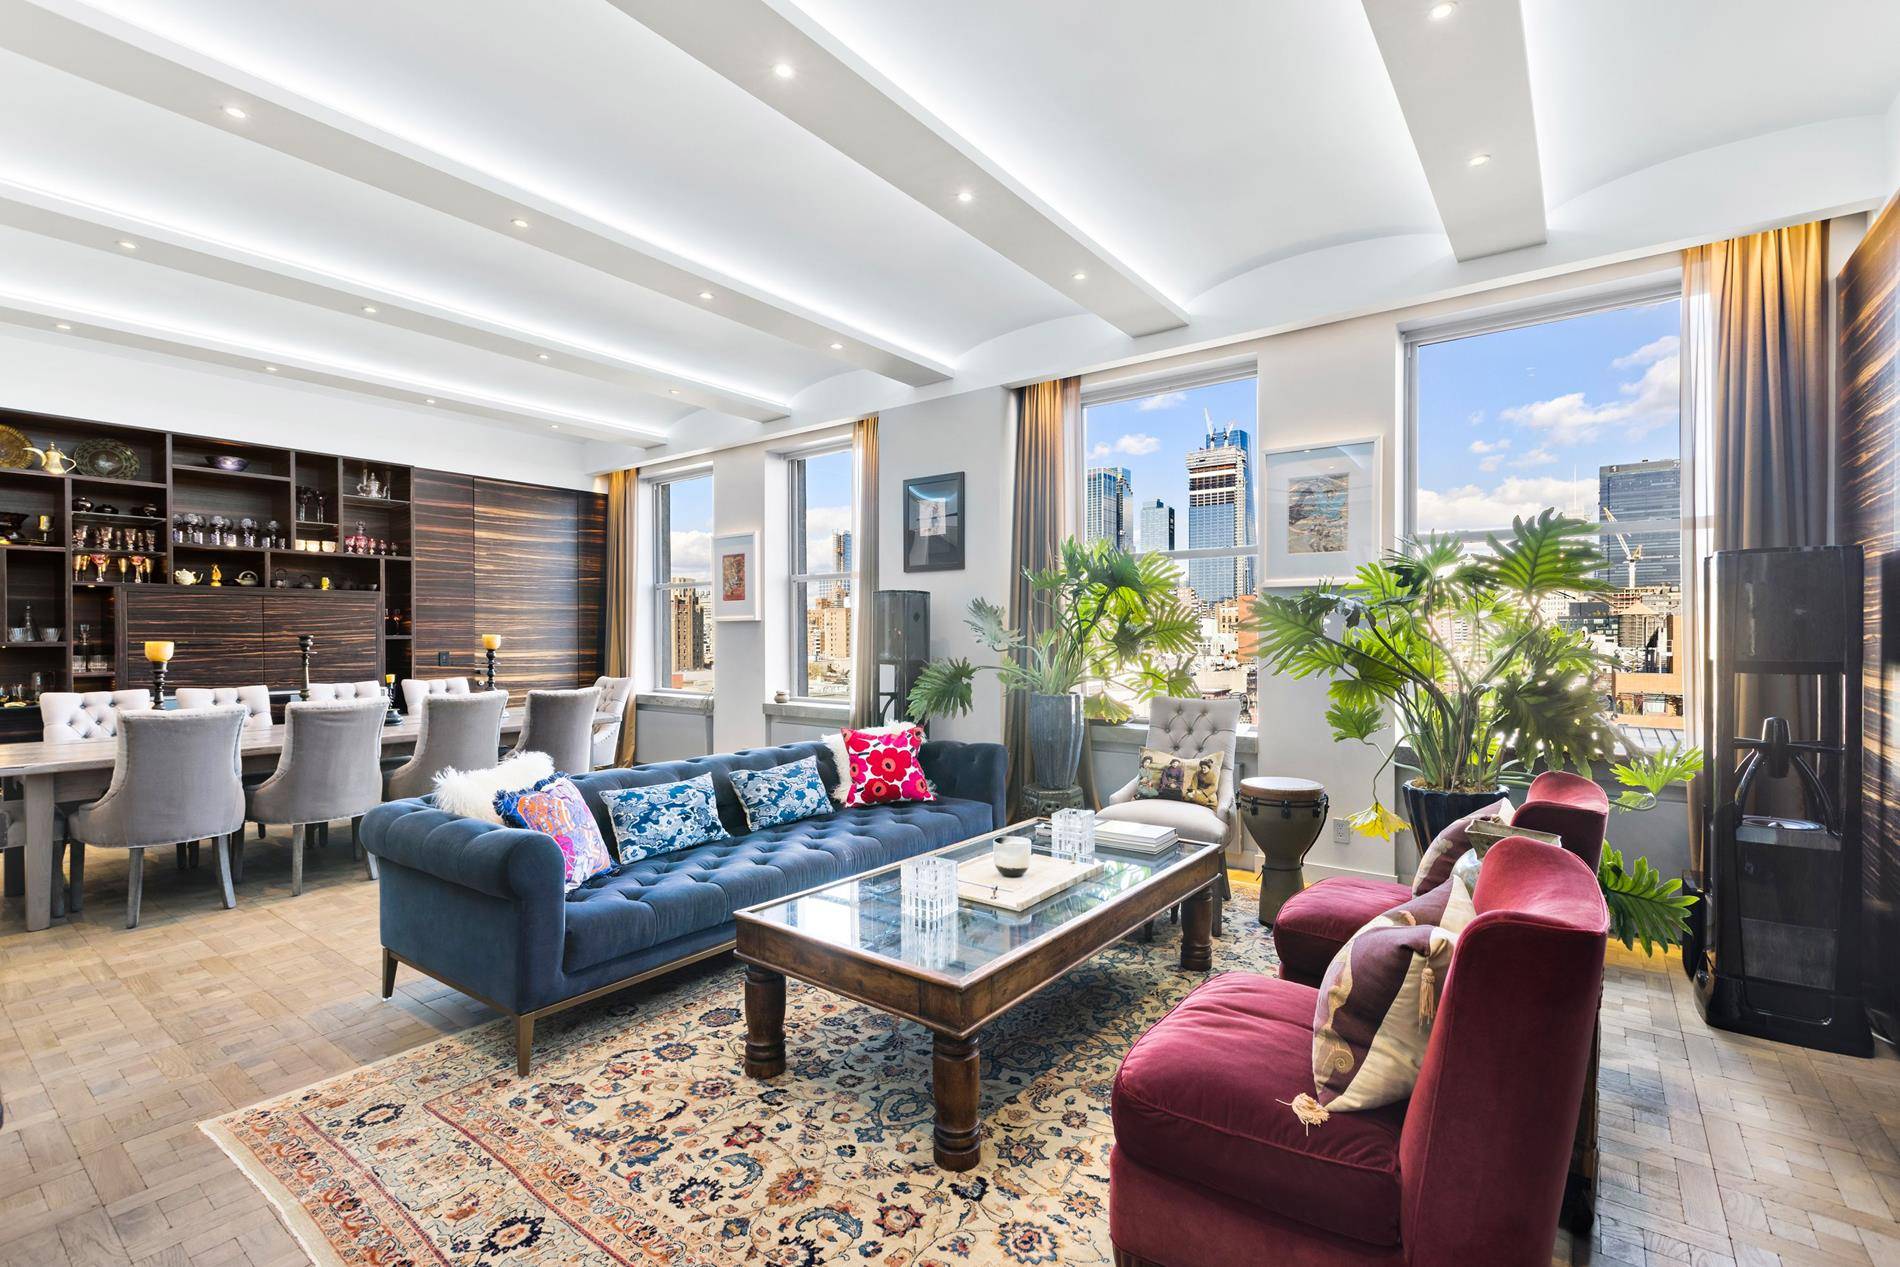 One of a kind penthouse like home in the Steiner building in the heart of Chelsea has now hit the market.